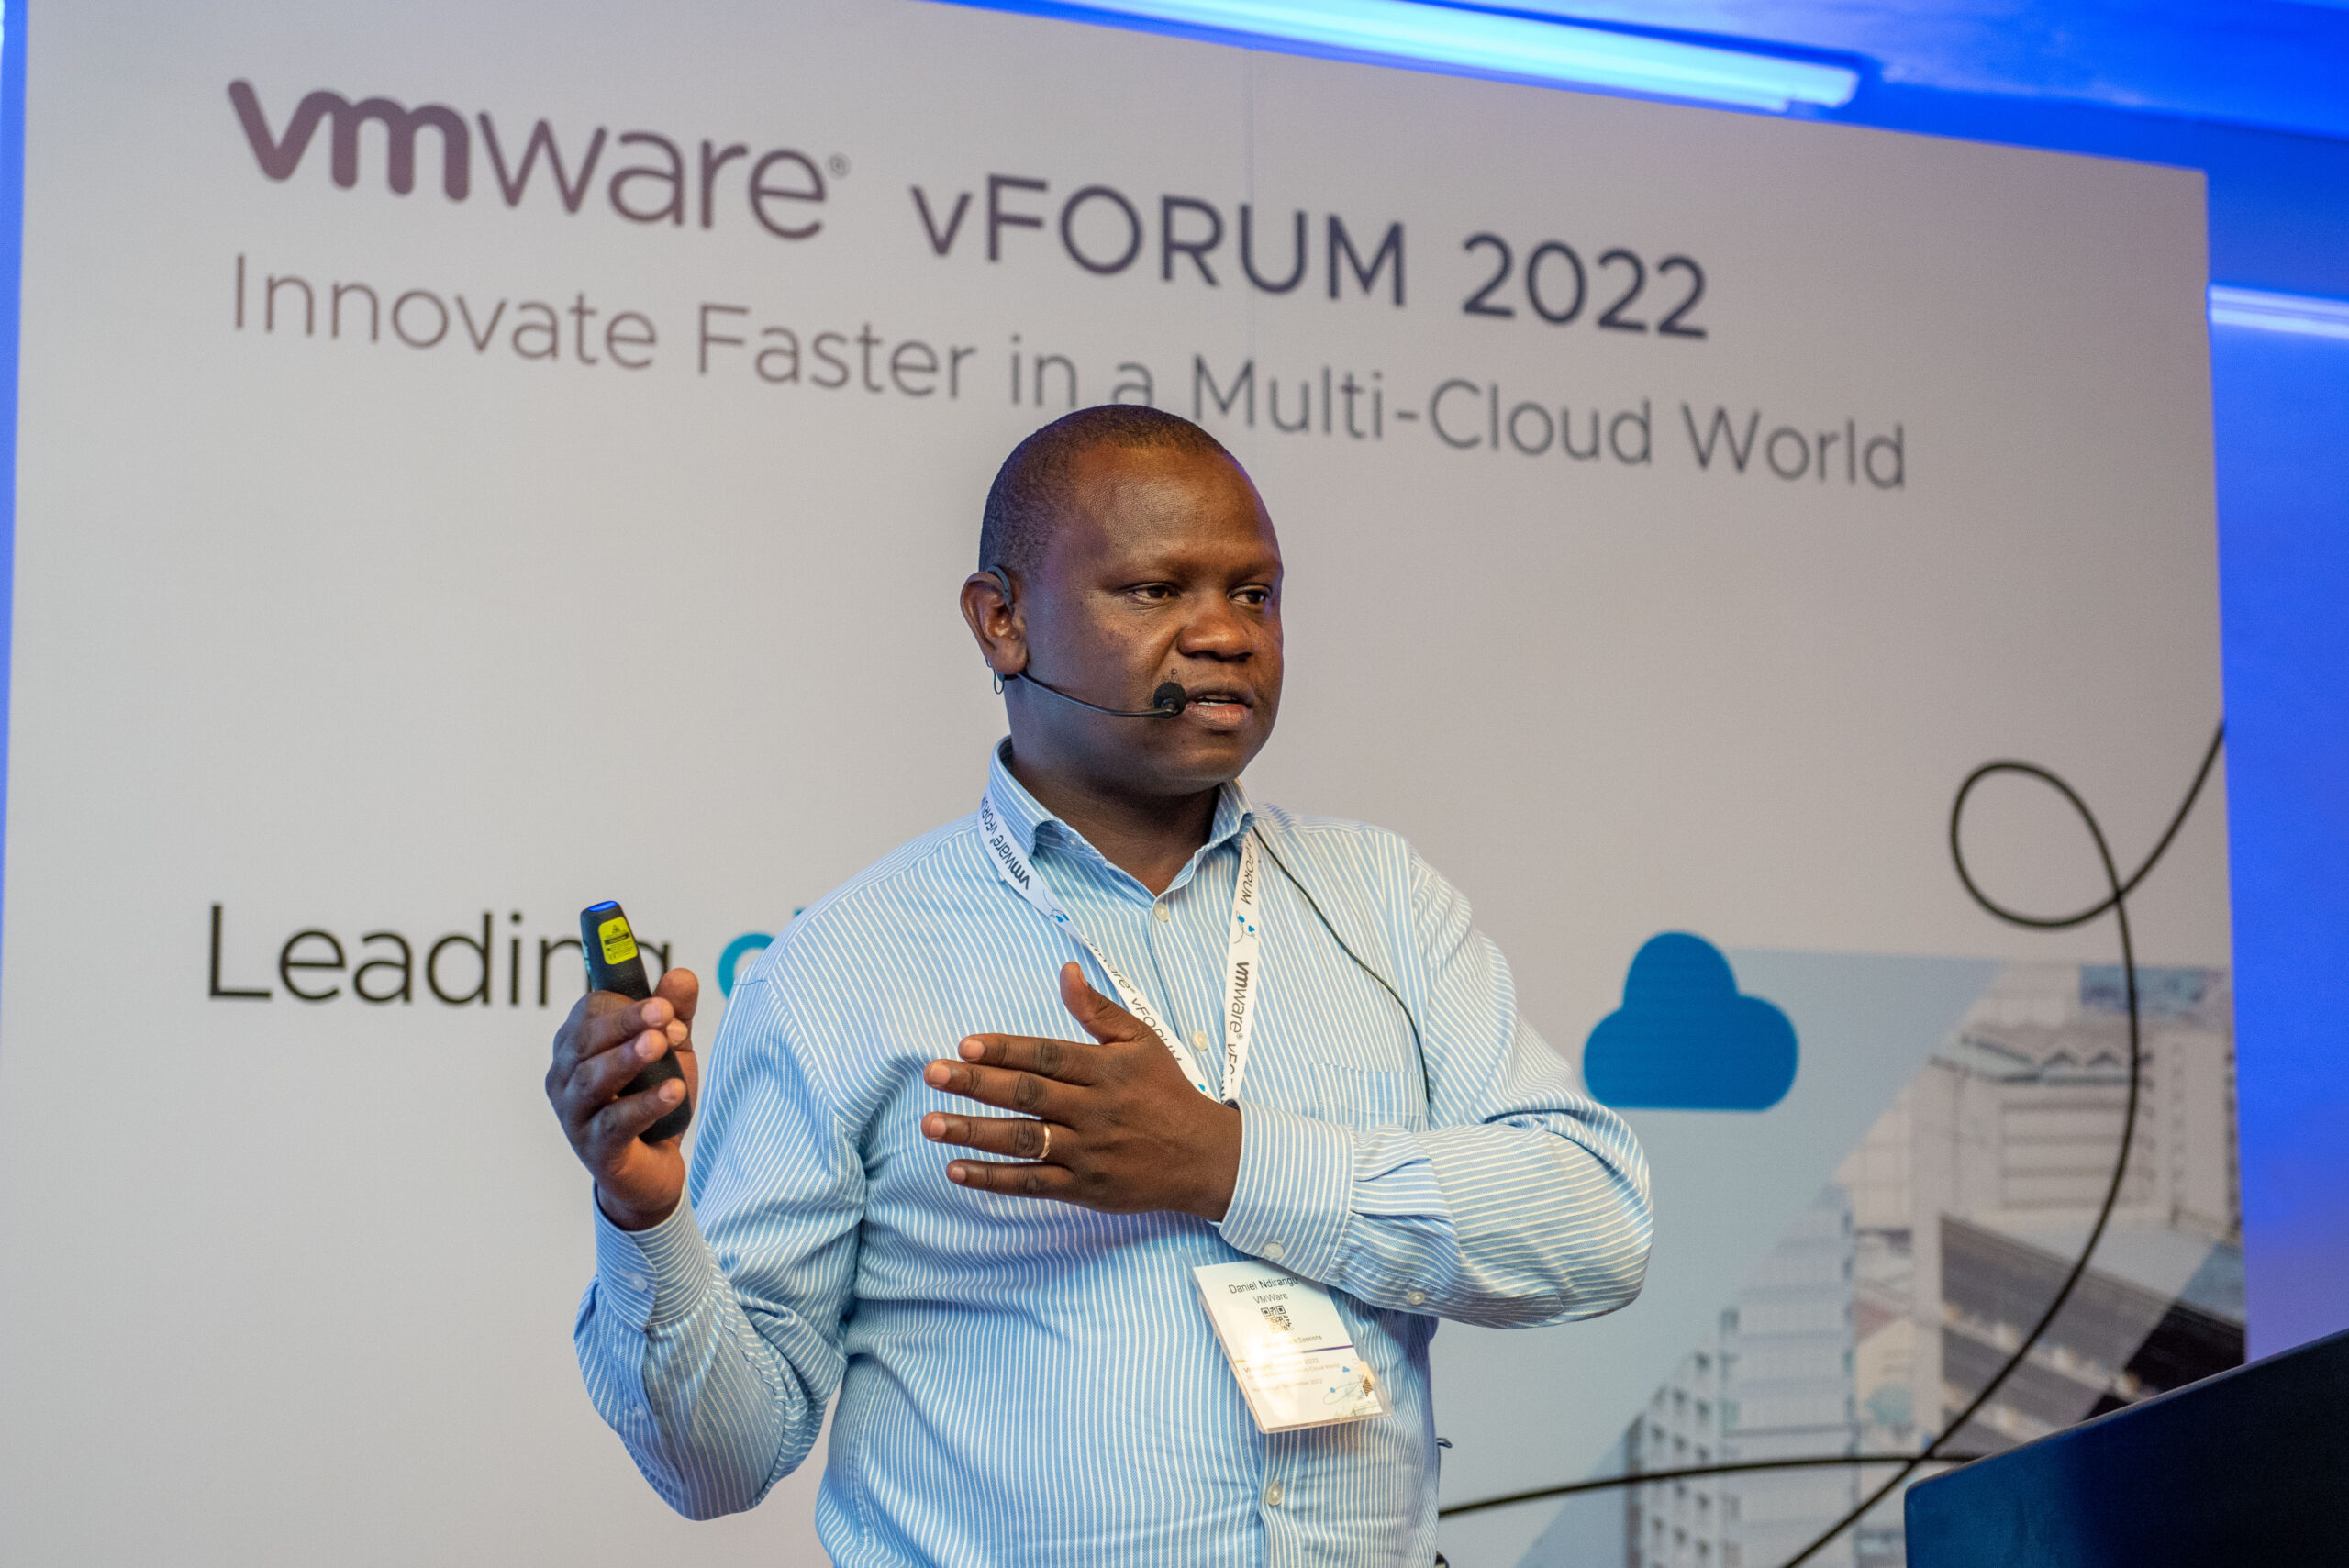 VMware’s VForum Highlights How Businesses Can Benefit From The Multi-Cloud